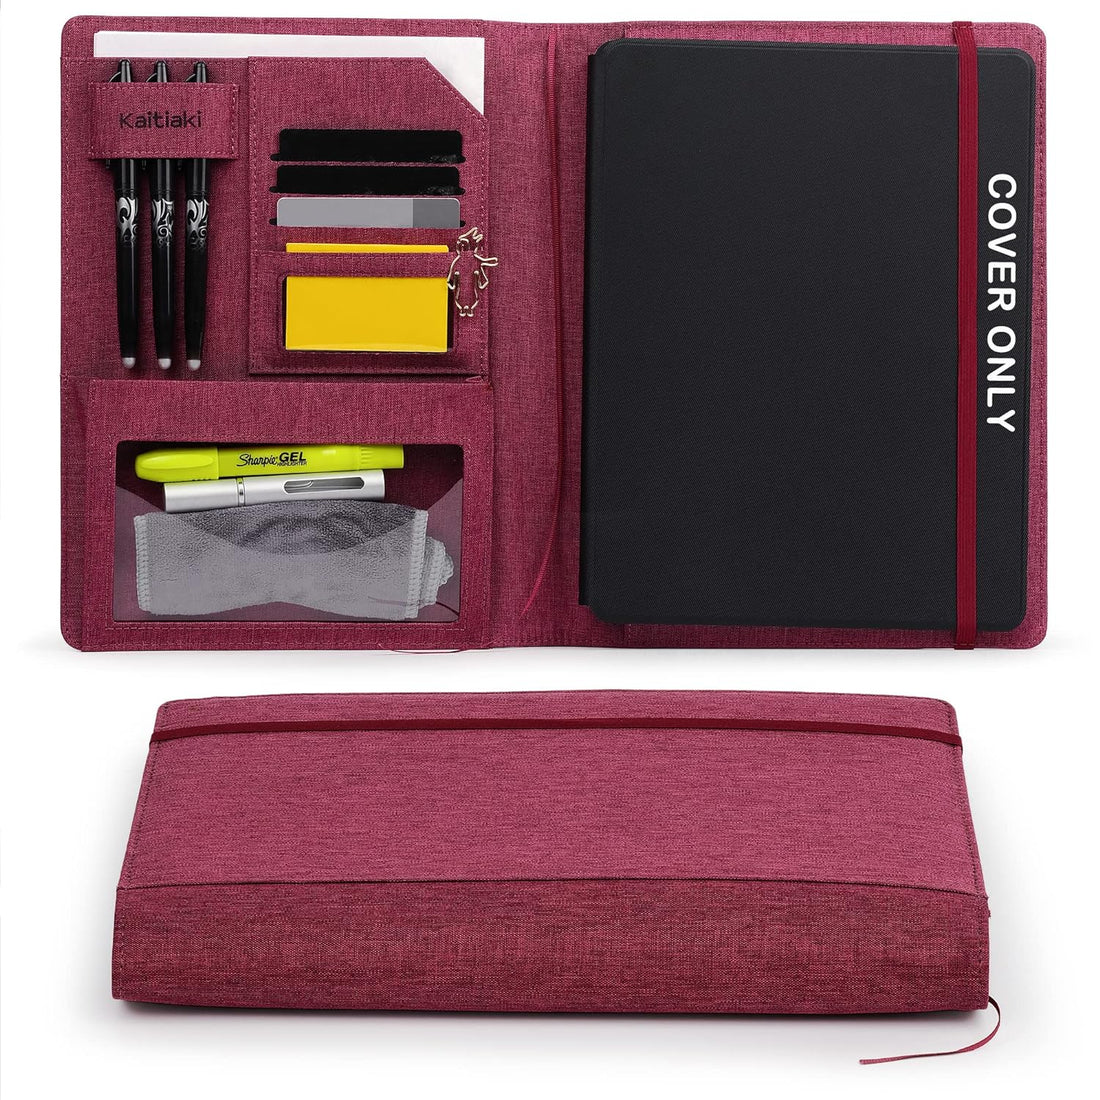 Folio Cover for Rocketbook Everlast Fusion - Letter Size, Multi Organizer with Pen Loop, Business Card Holder, Zipper Pocket Support Mini Size Rocketbook, Waterproof Fabric, 11 x 9 inch, Fuchsia